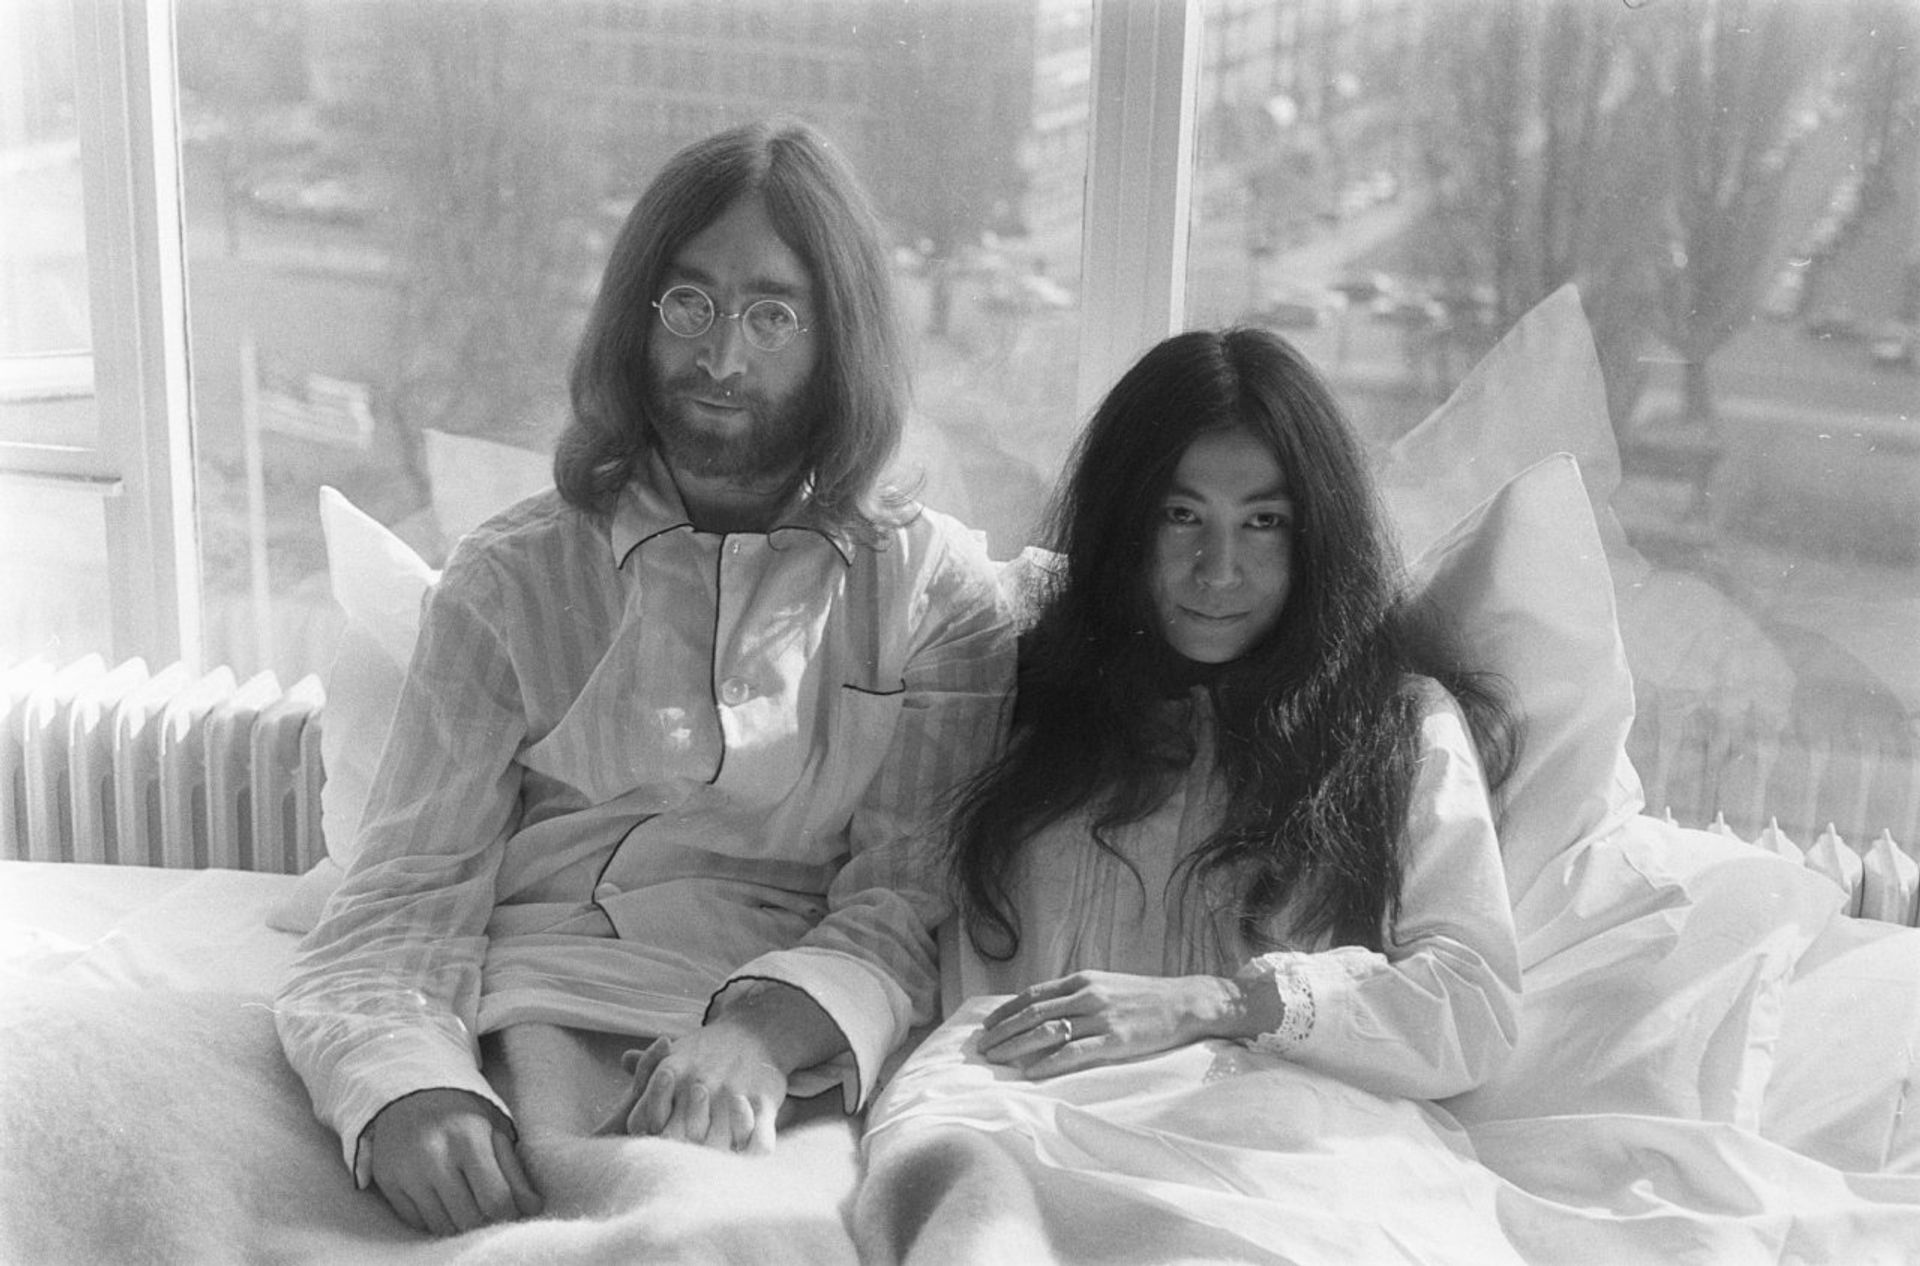 Yoko Ono considered Lennon's diaries to be "holy" Wiki Commons